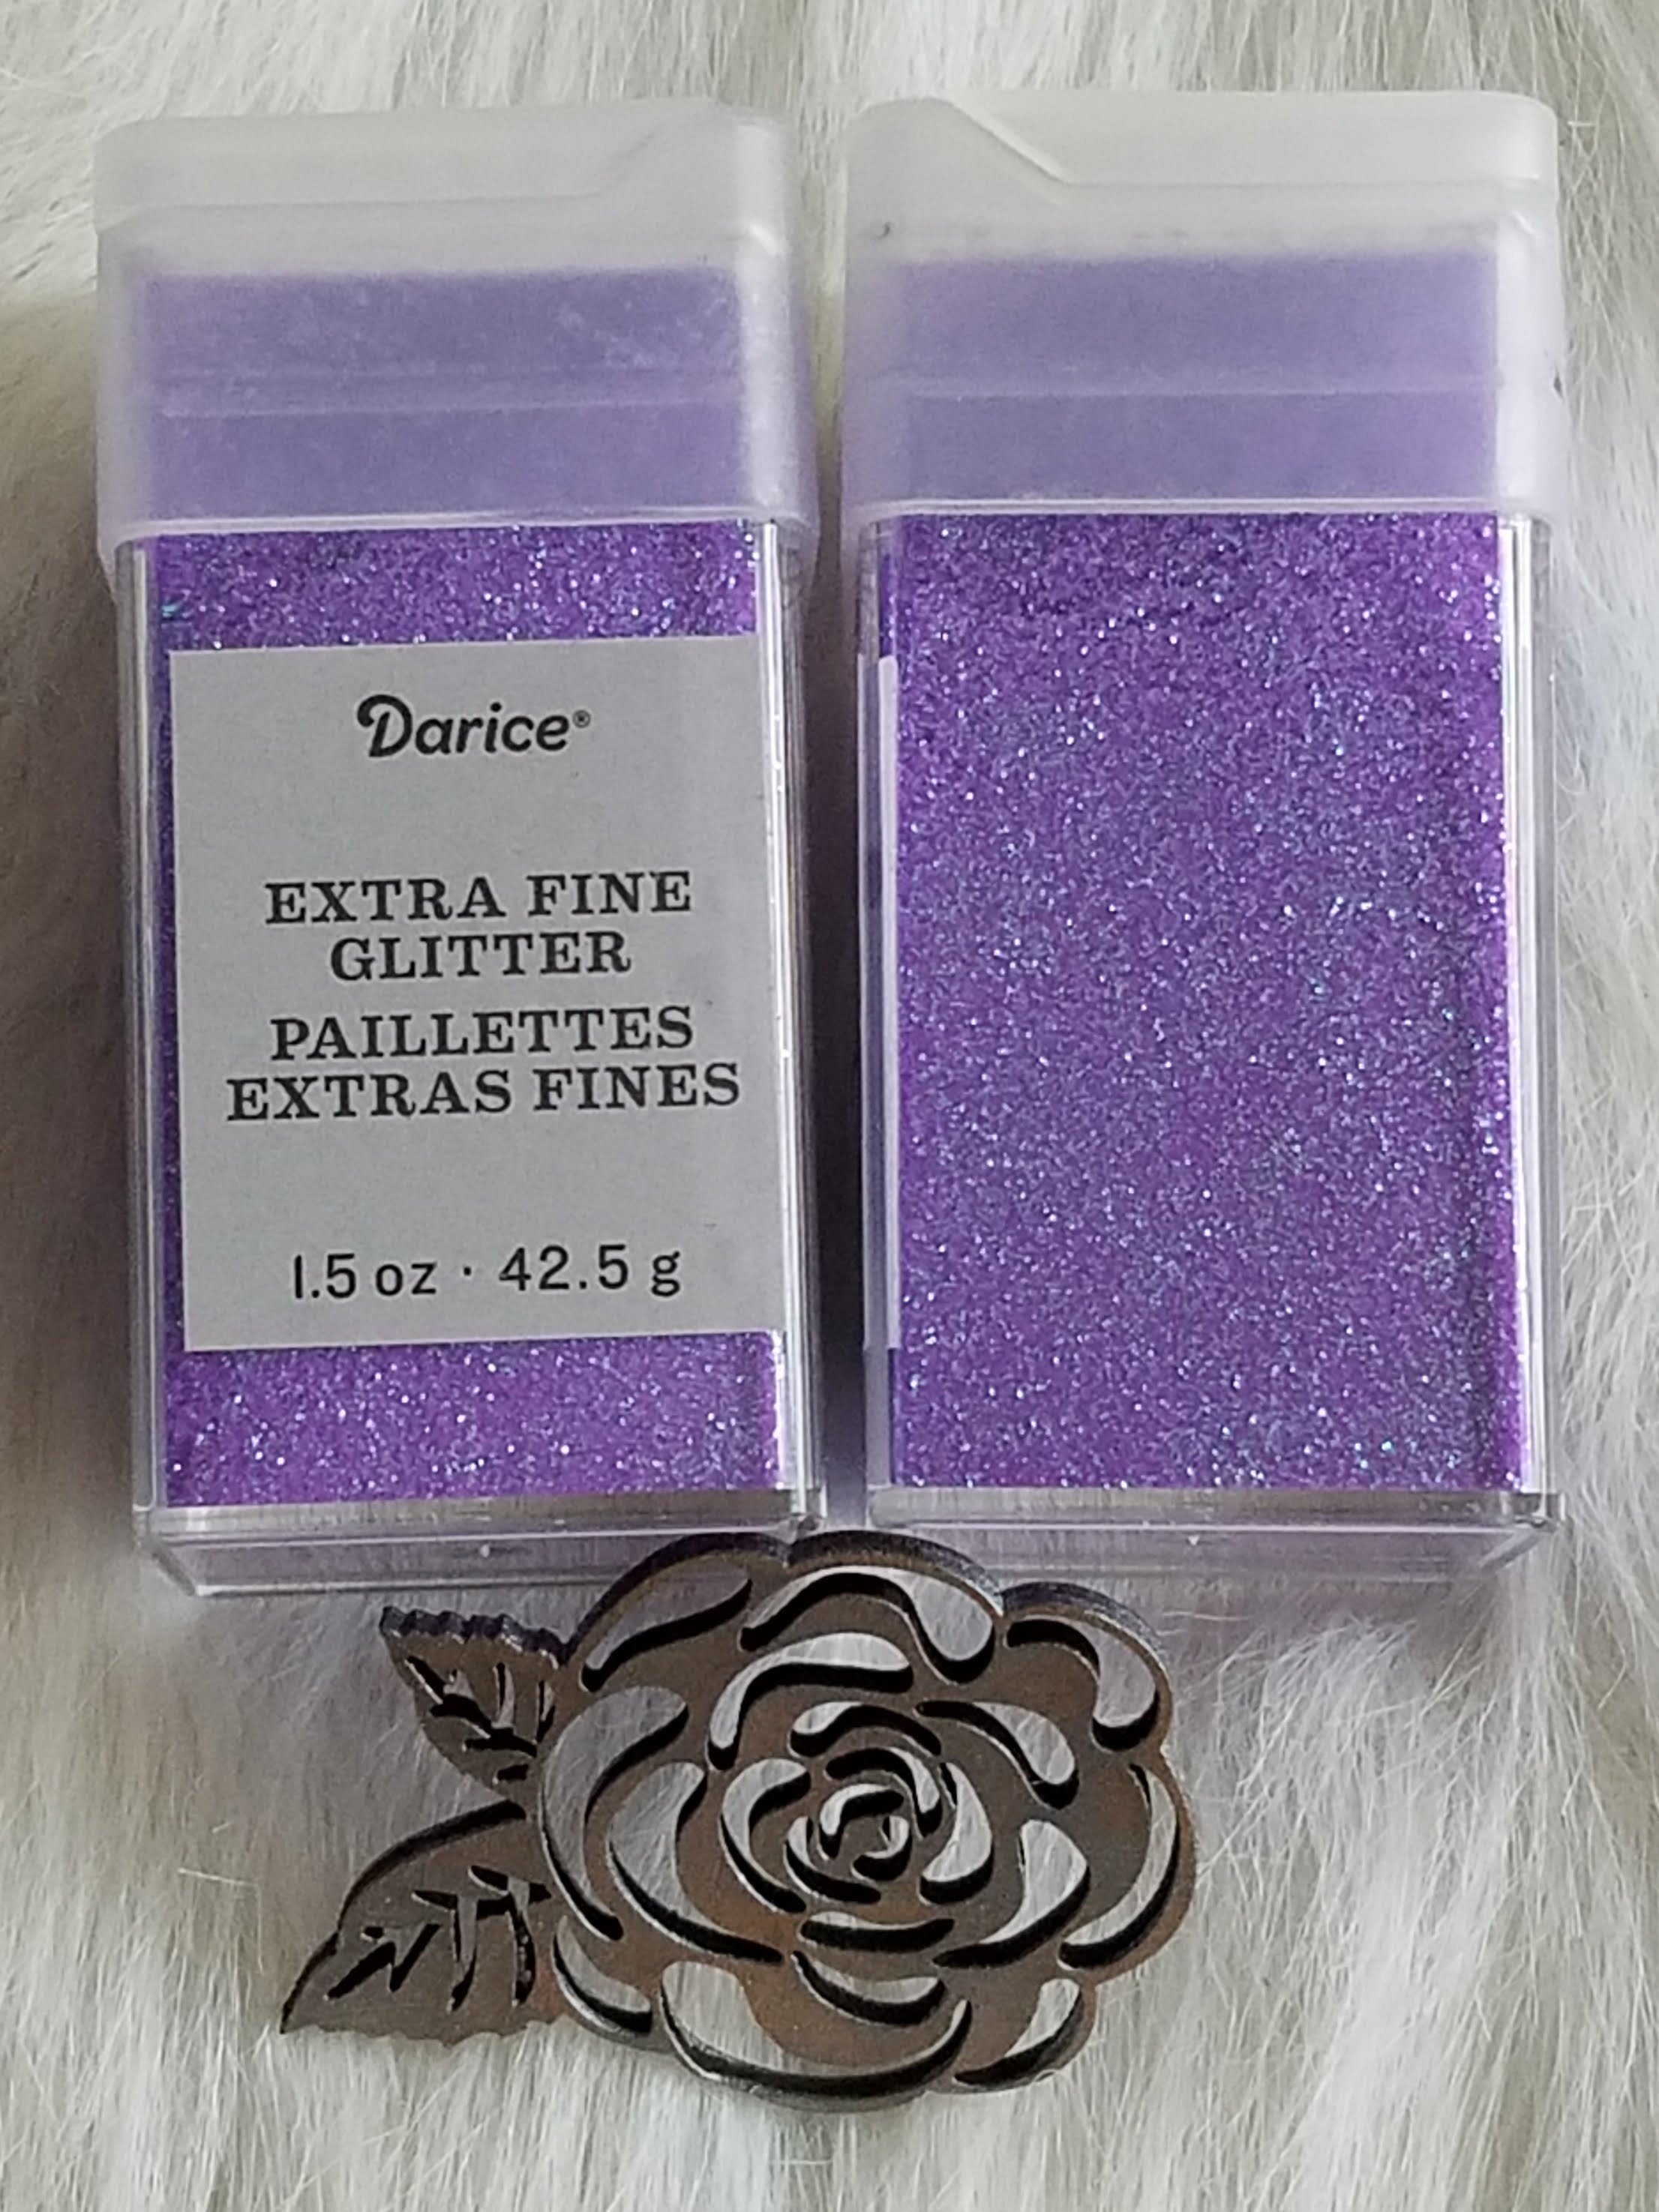 Darice Extra Fine Glitter 4.58oz 10-color Set Compare With Recollections Extra  Fine Glitter Line identical 